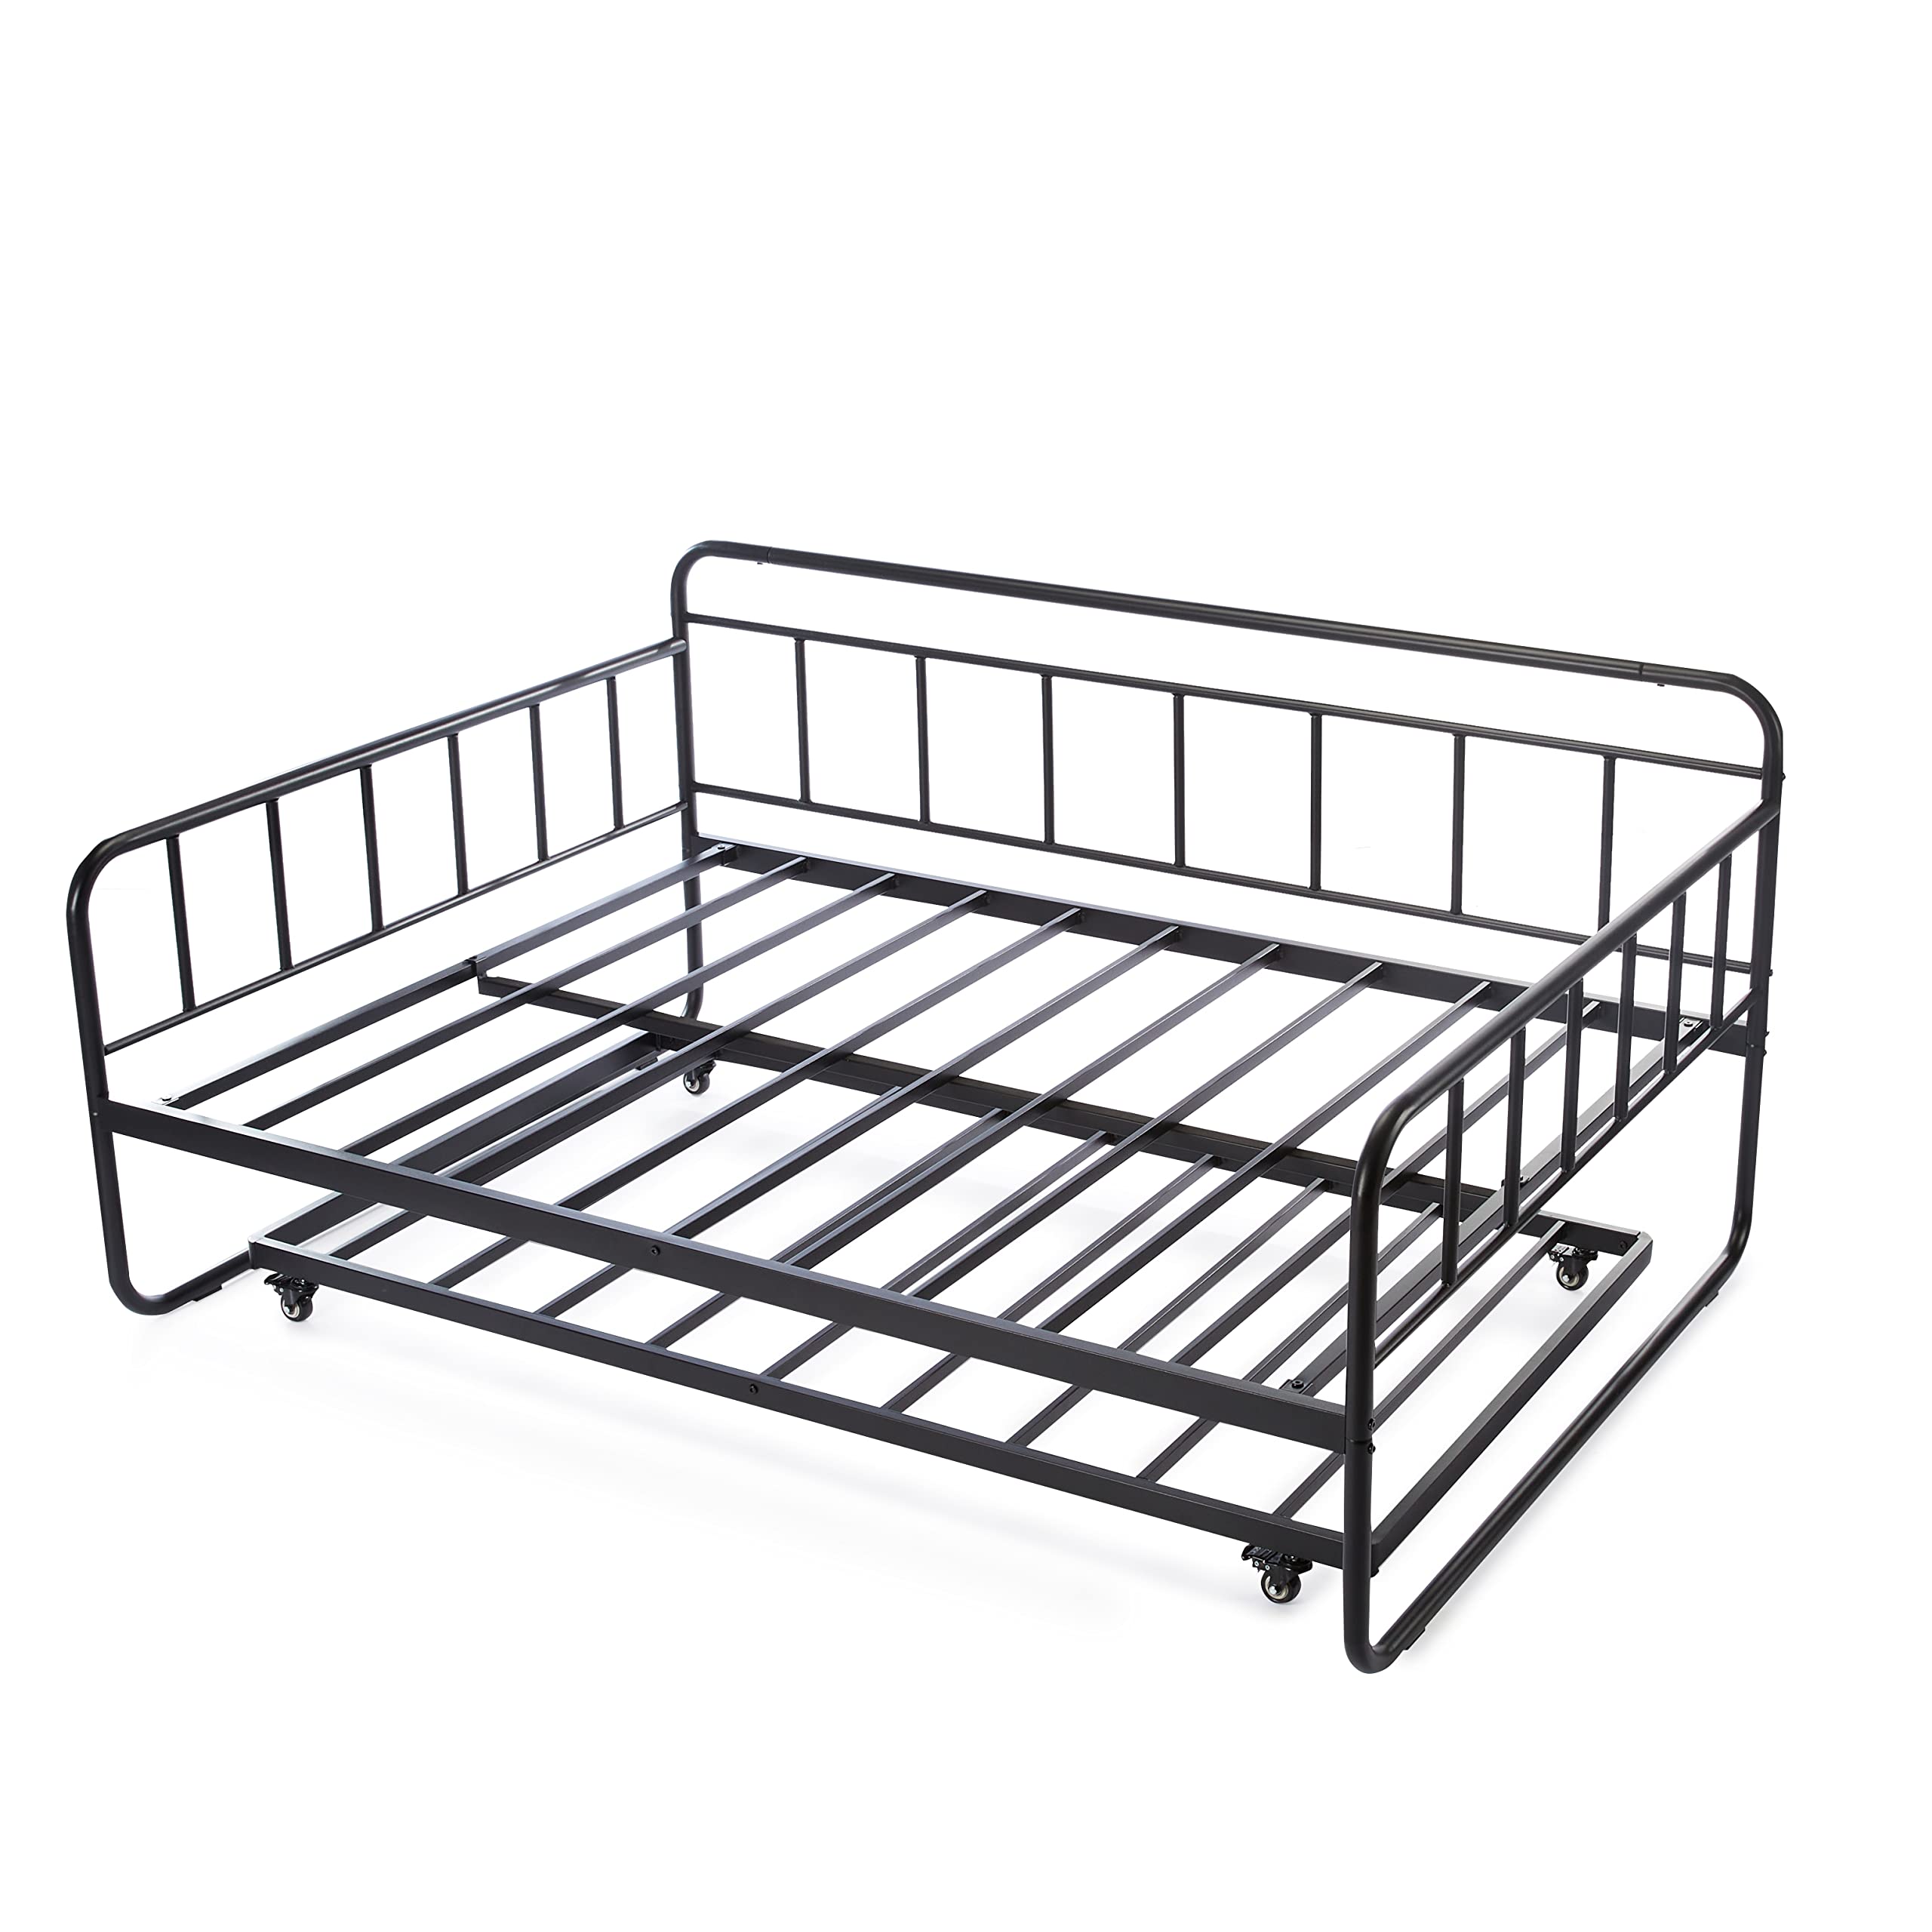 Amazon Basics Full Daybed and Twin Size Trundle Bed Frame Set, Steel Slat Support, Black